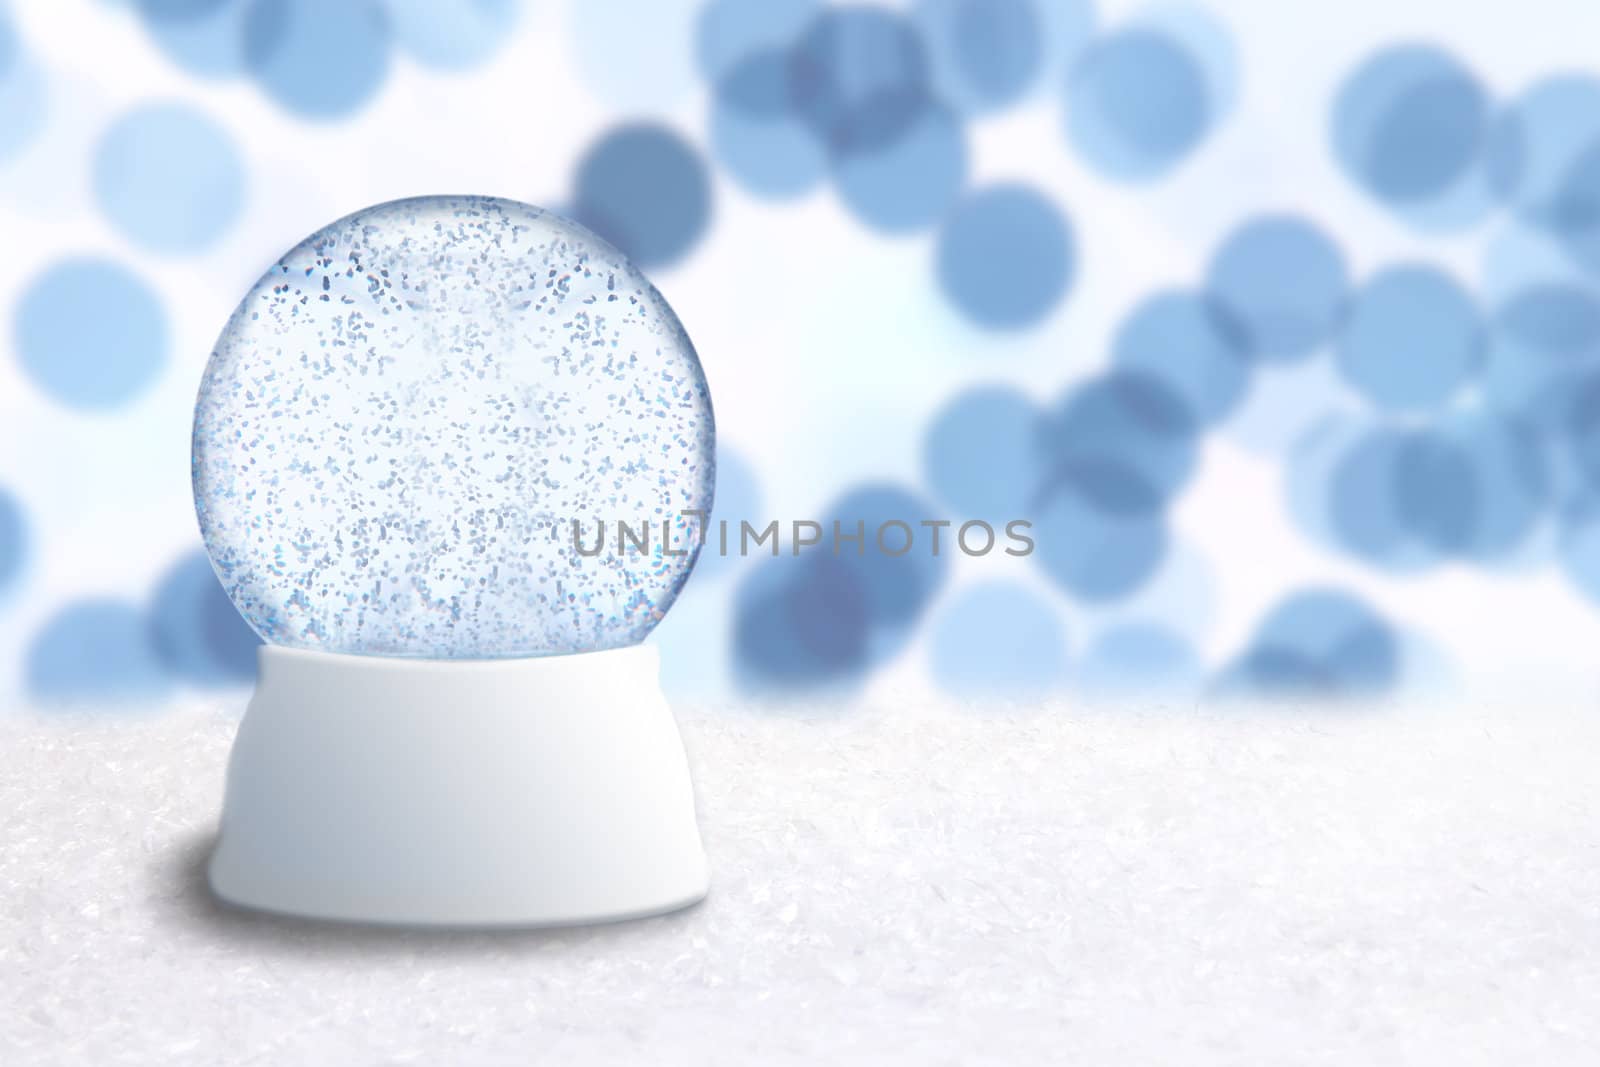 Empty Christmas Snow Globe With Blue Holiday Background. Insert Your Own Image or Text